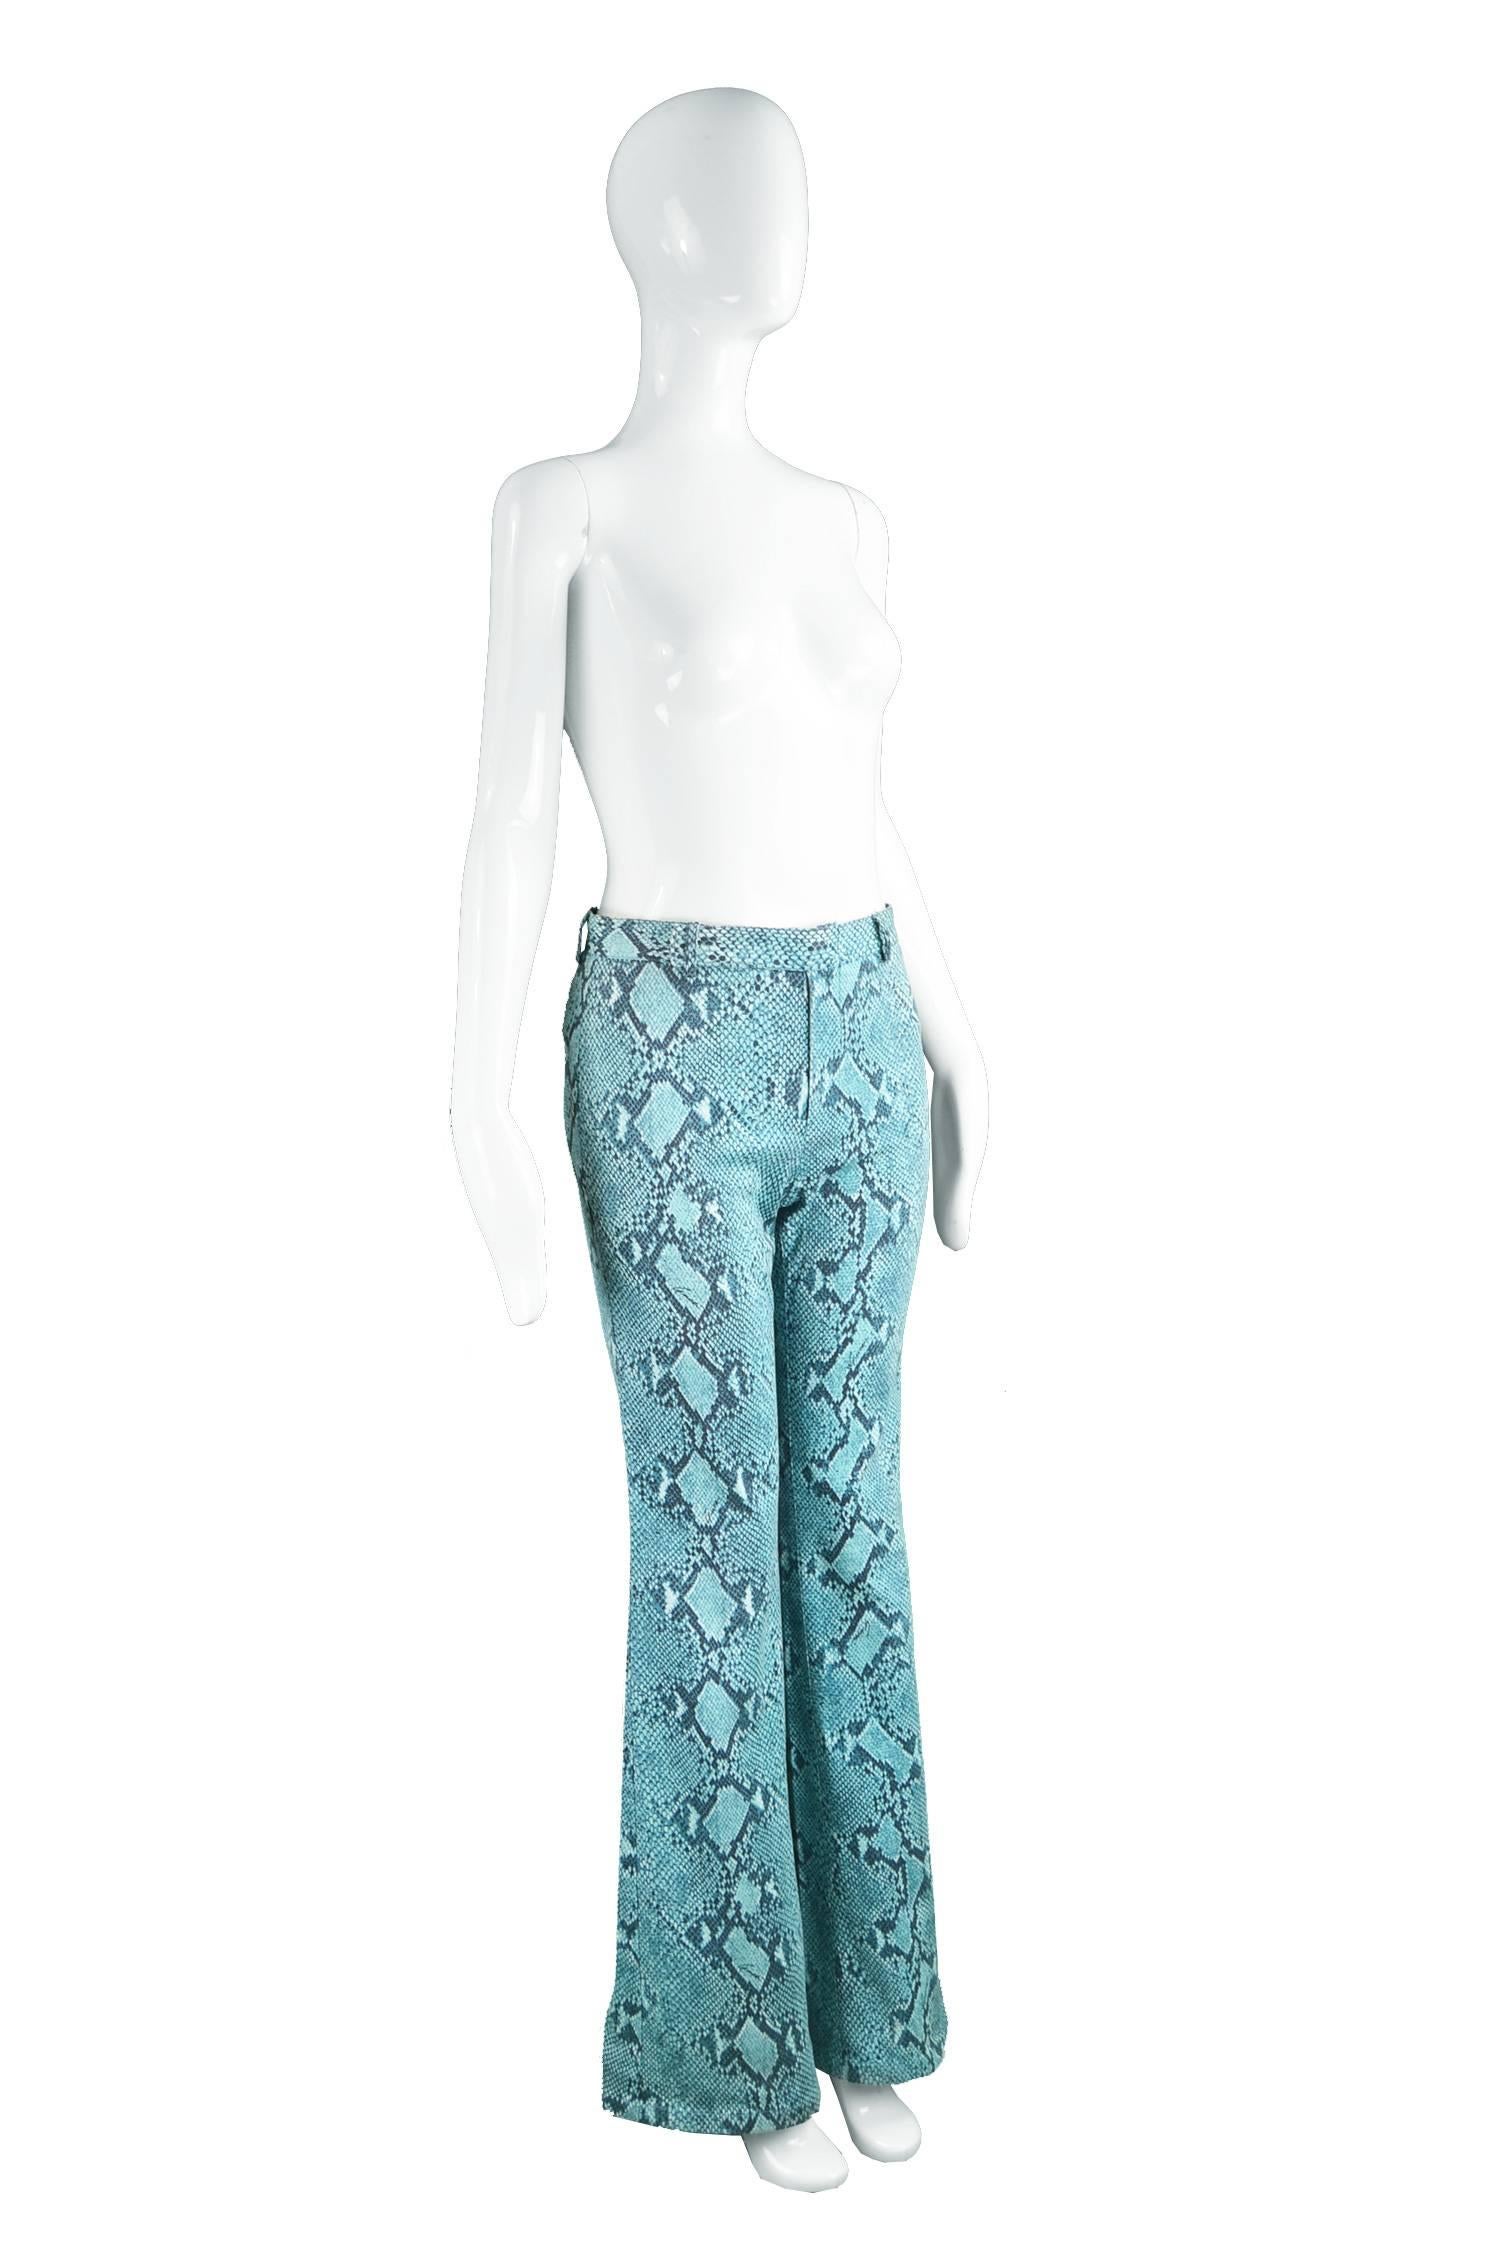 Women's Tom Ford for Gucci Blue Cotton Snakeskin Print Flared Pants, Spring 2000 For Sale